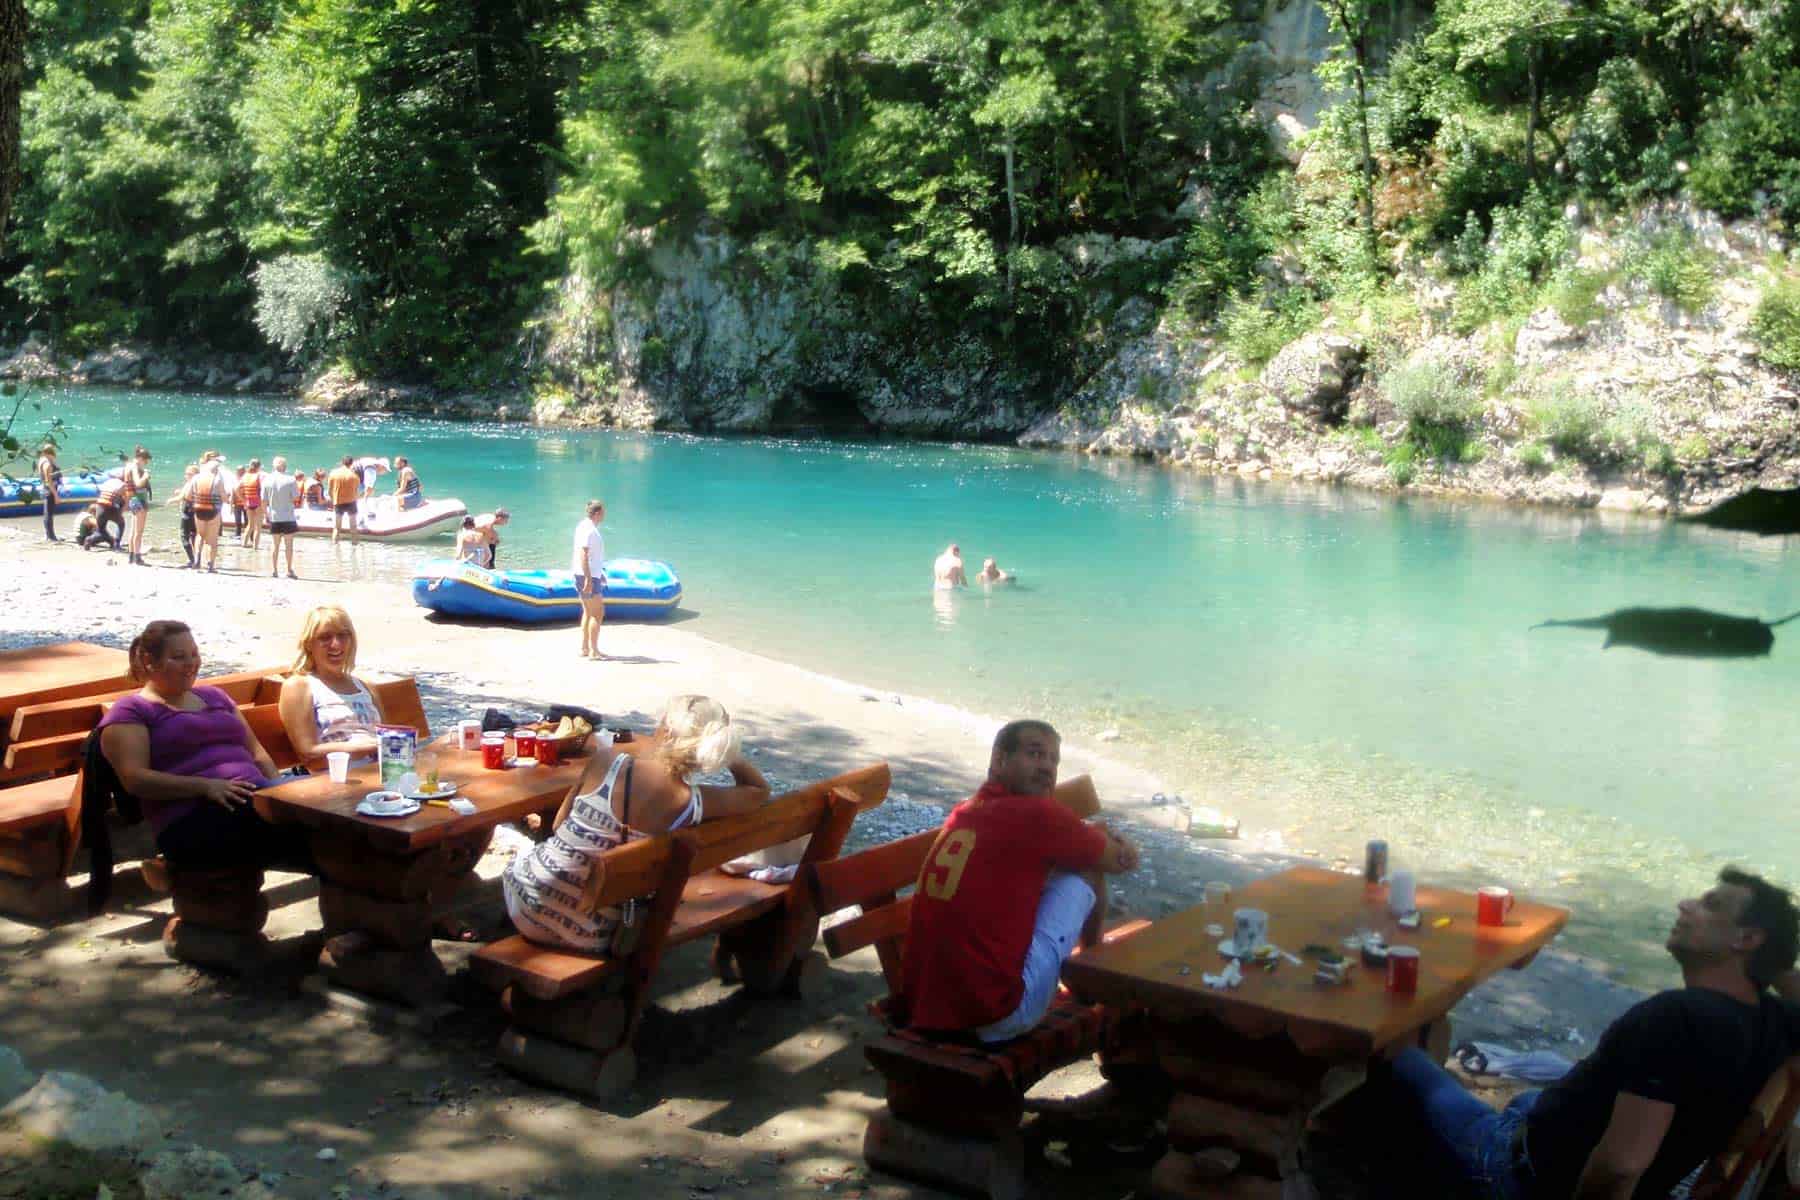 Emjoying a meal and drinks after rafting adventure